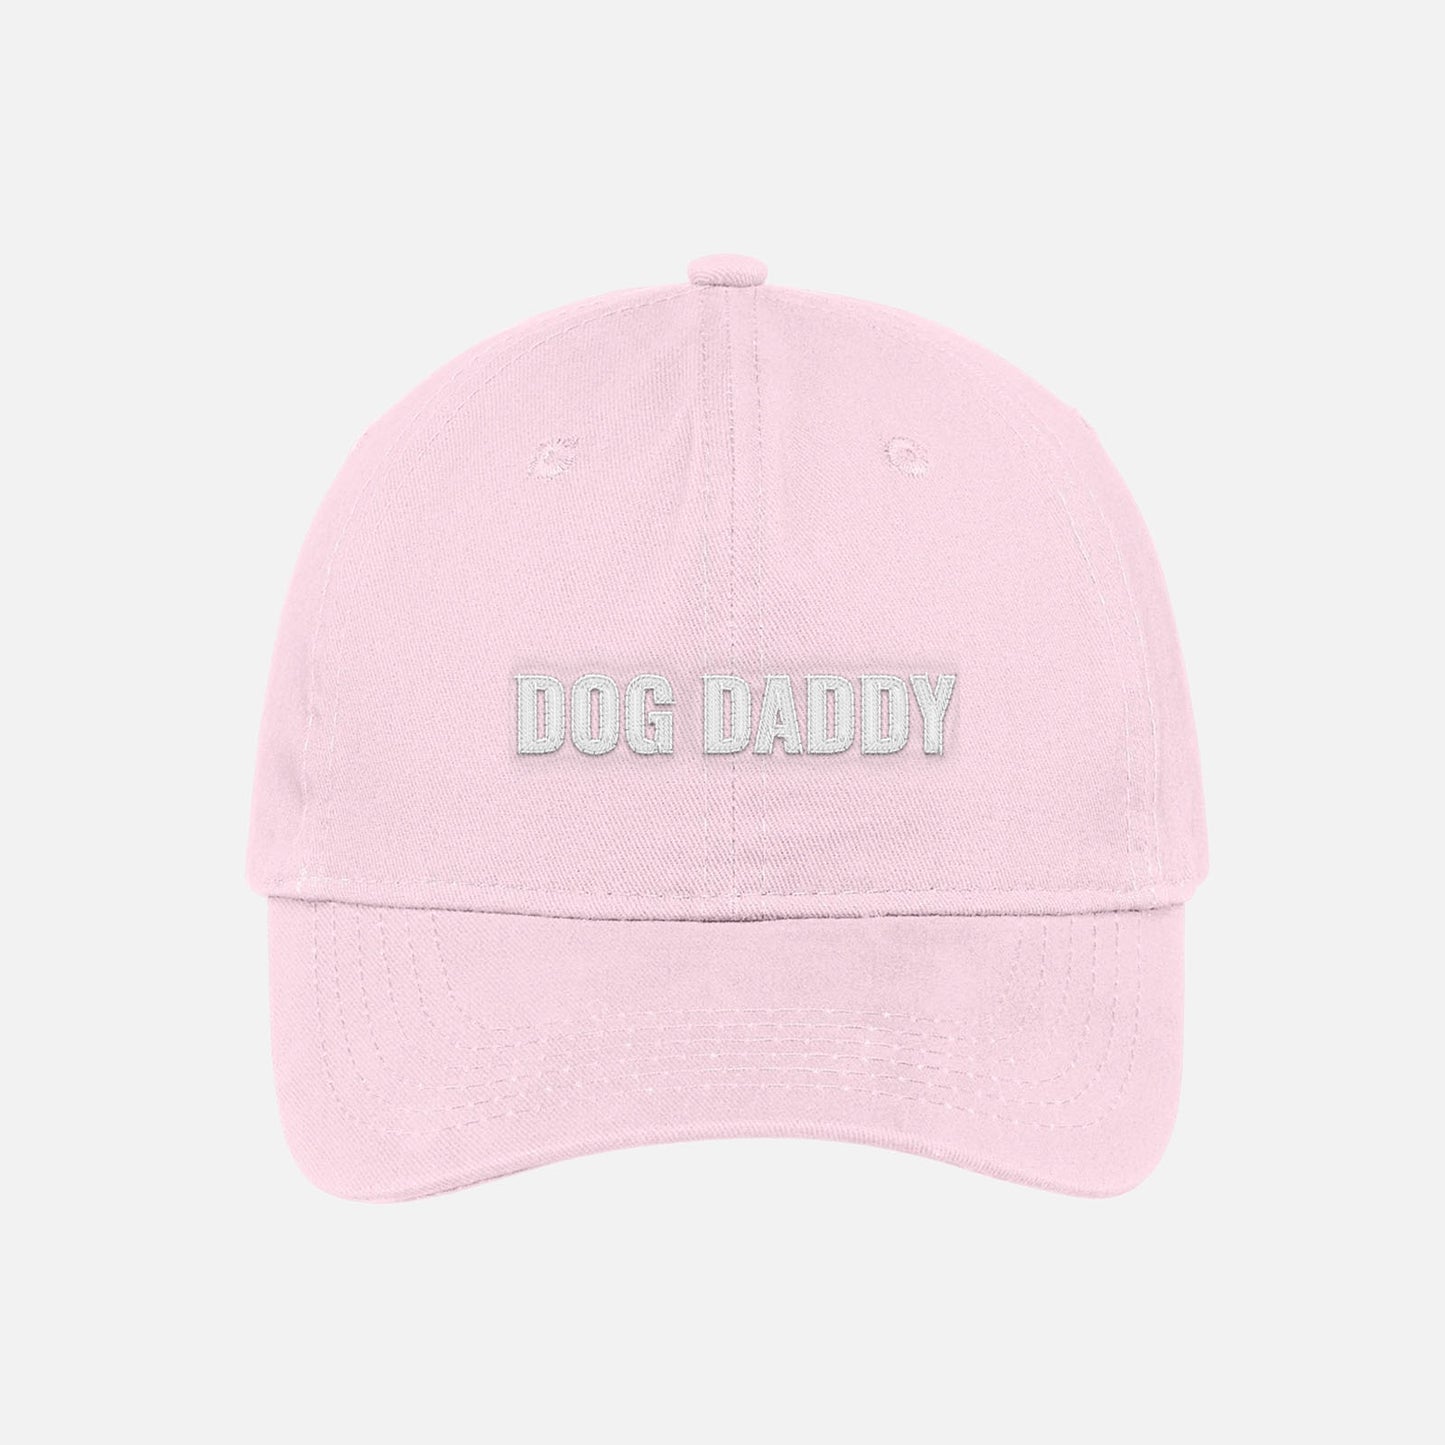 Blush pink pink dog daddy dad hat embroidered baseball cap with white text.